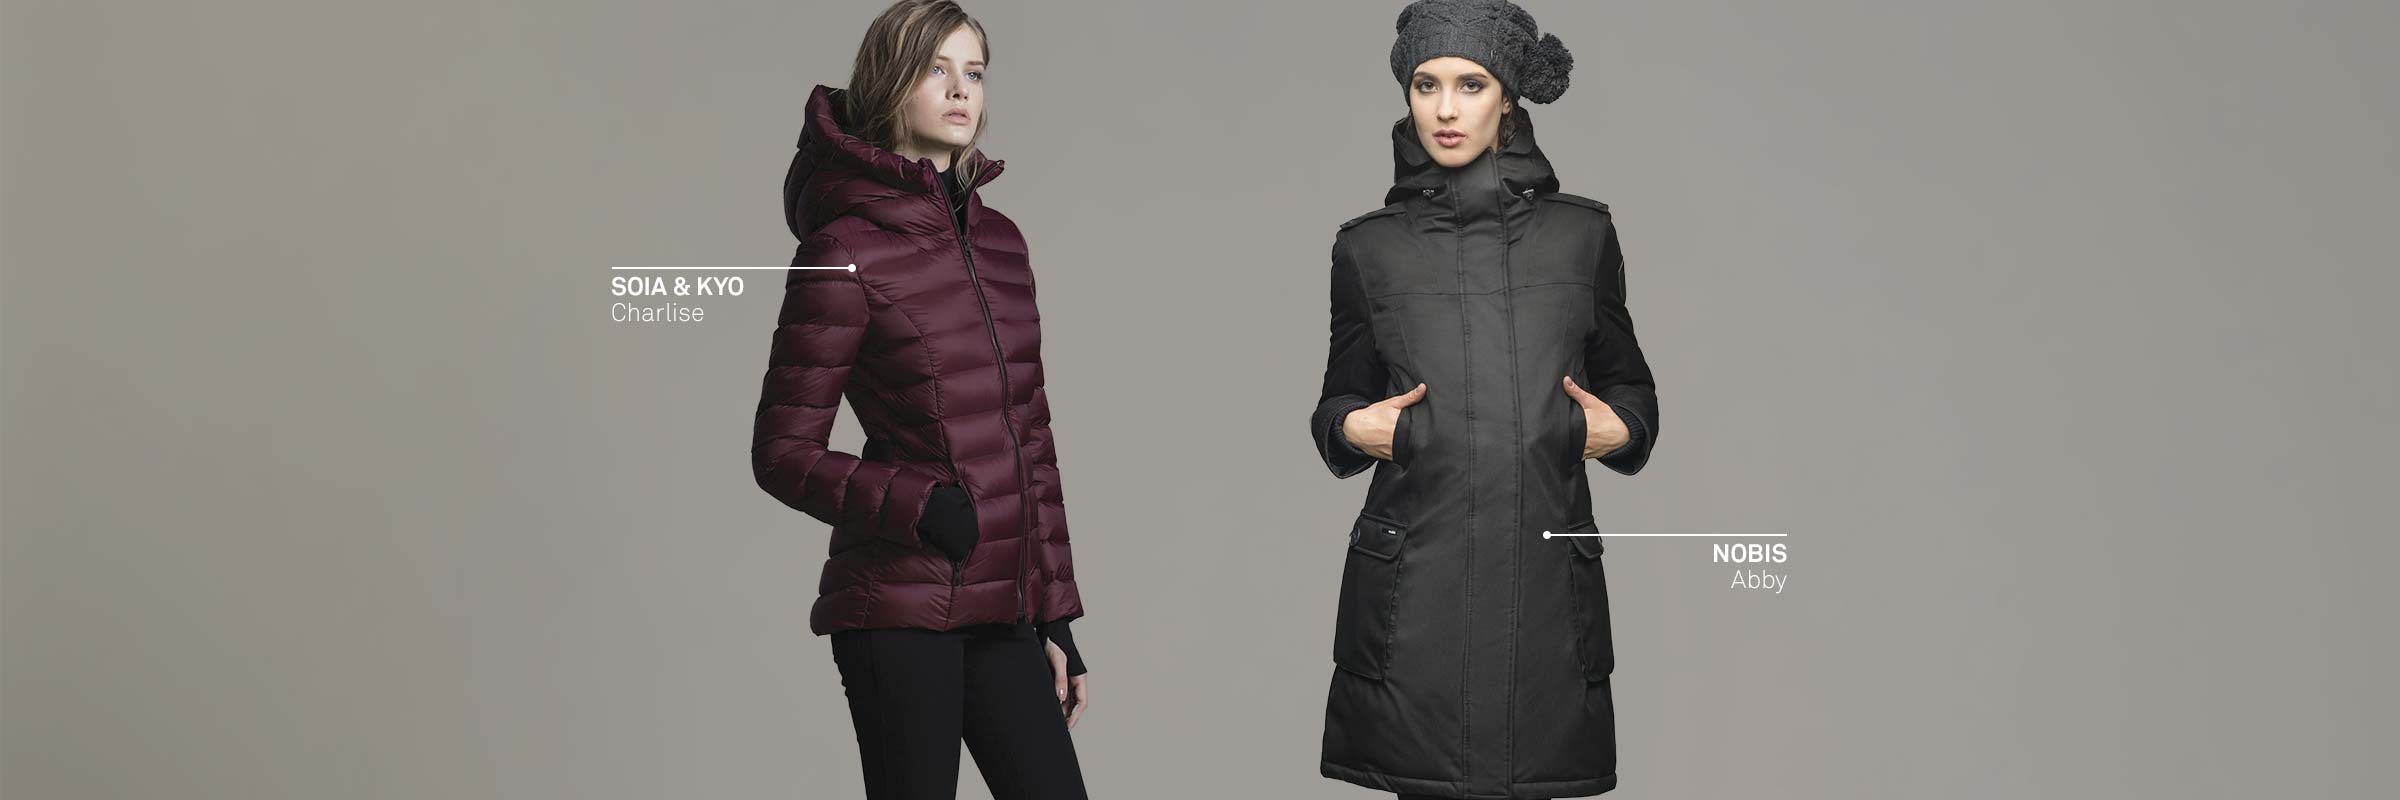 Differences Between a Parka and a Jacket | Altitude Blog – picsstyle.com